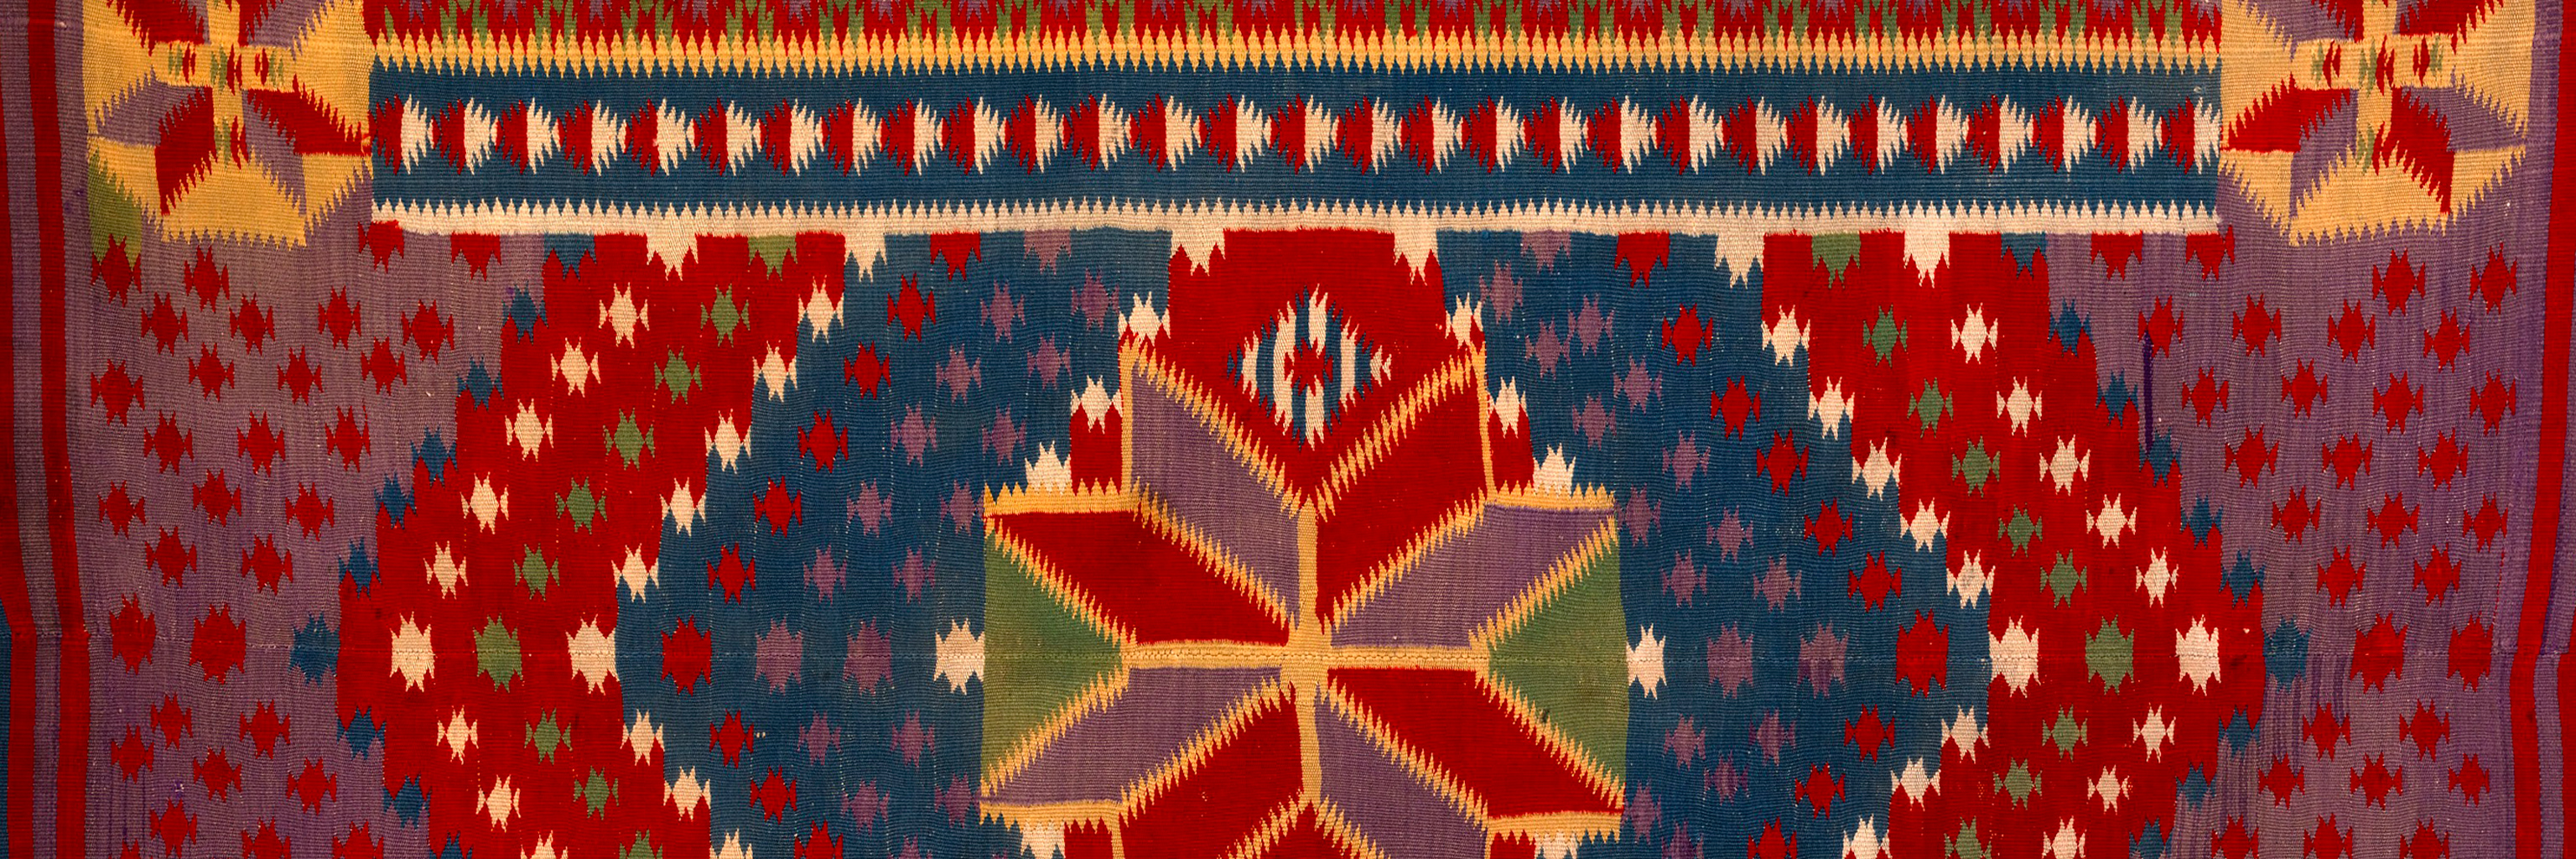 A close up detail of a colorful patterned tapestry.